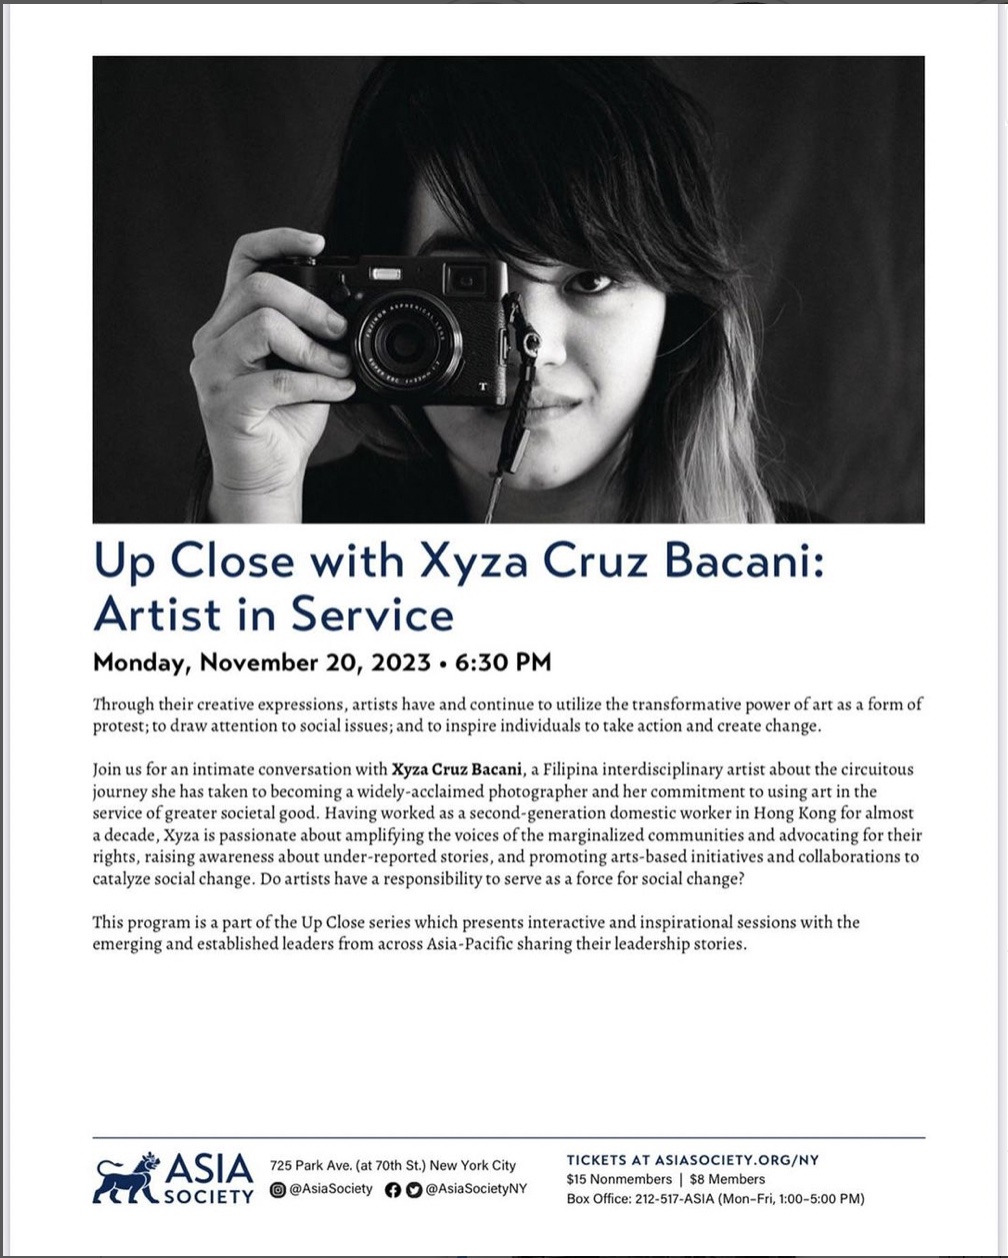 portrait of Xyza Cruz Bacani and description of the Up Close event: Through their creative expressions, artists have and continue to utilize the transformative power of art as a form of protest; to draw attention to social issues; and to inspire individuals to take action and create change. Do artists have a responsibility to serve as a force for social change?